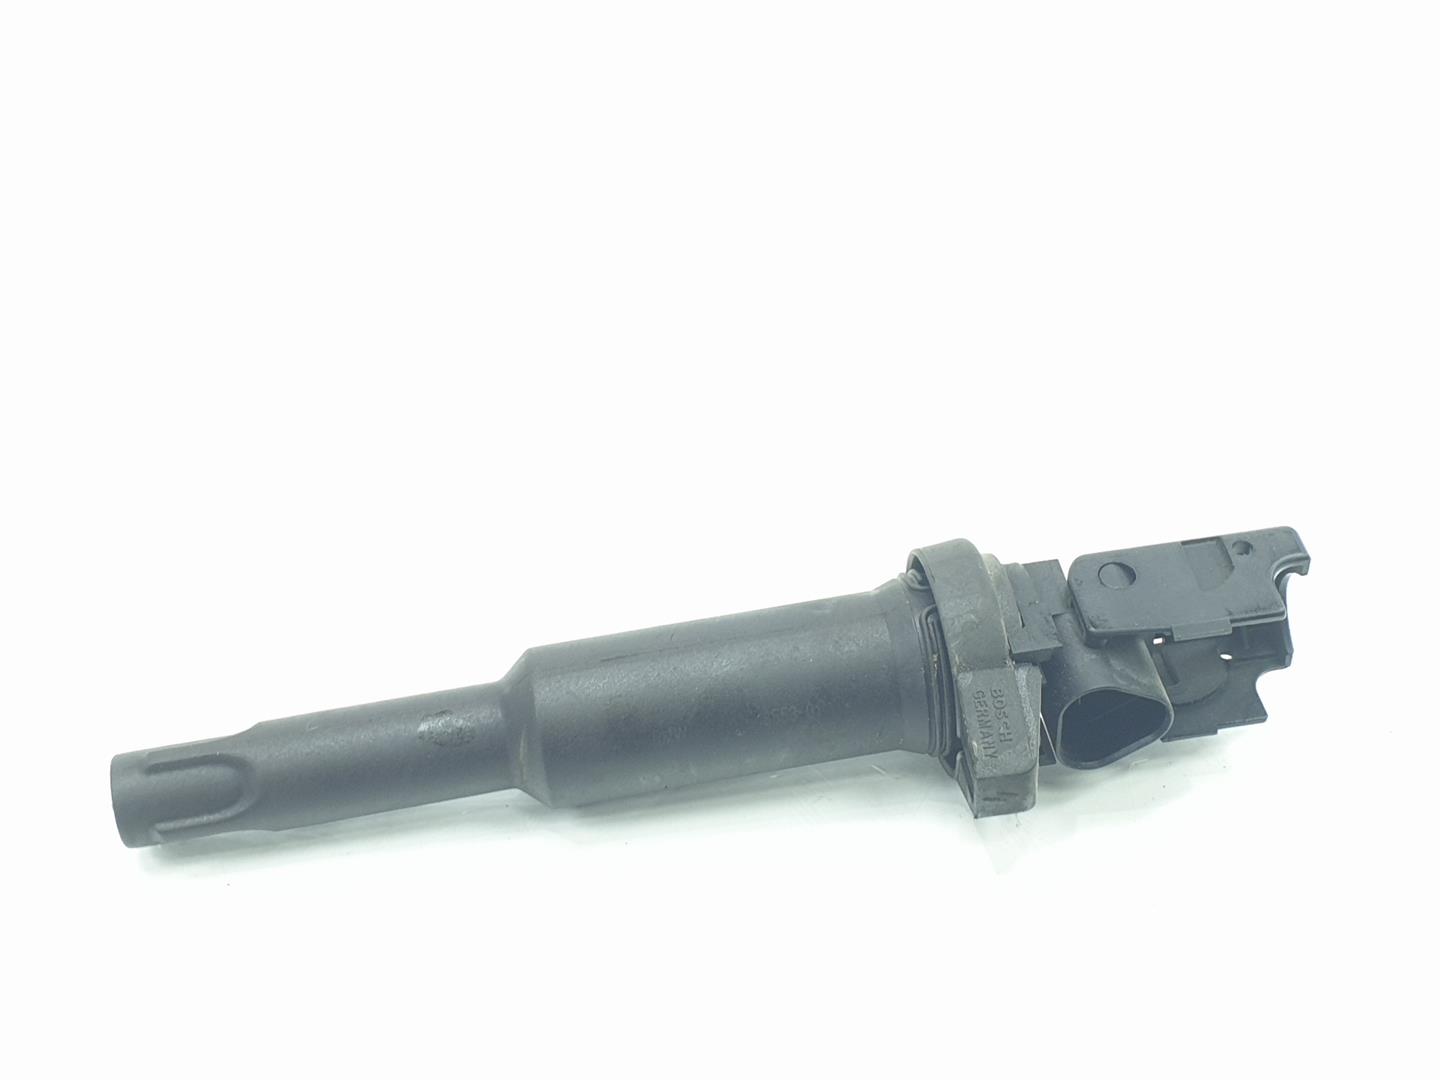 BMW 6 Series E63/E64 (2003-2010) High Voltage Ignition Coil 7548553, 7548553, 1111AA 24700098